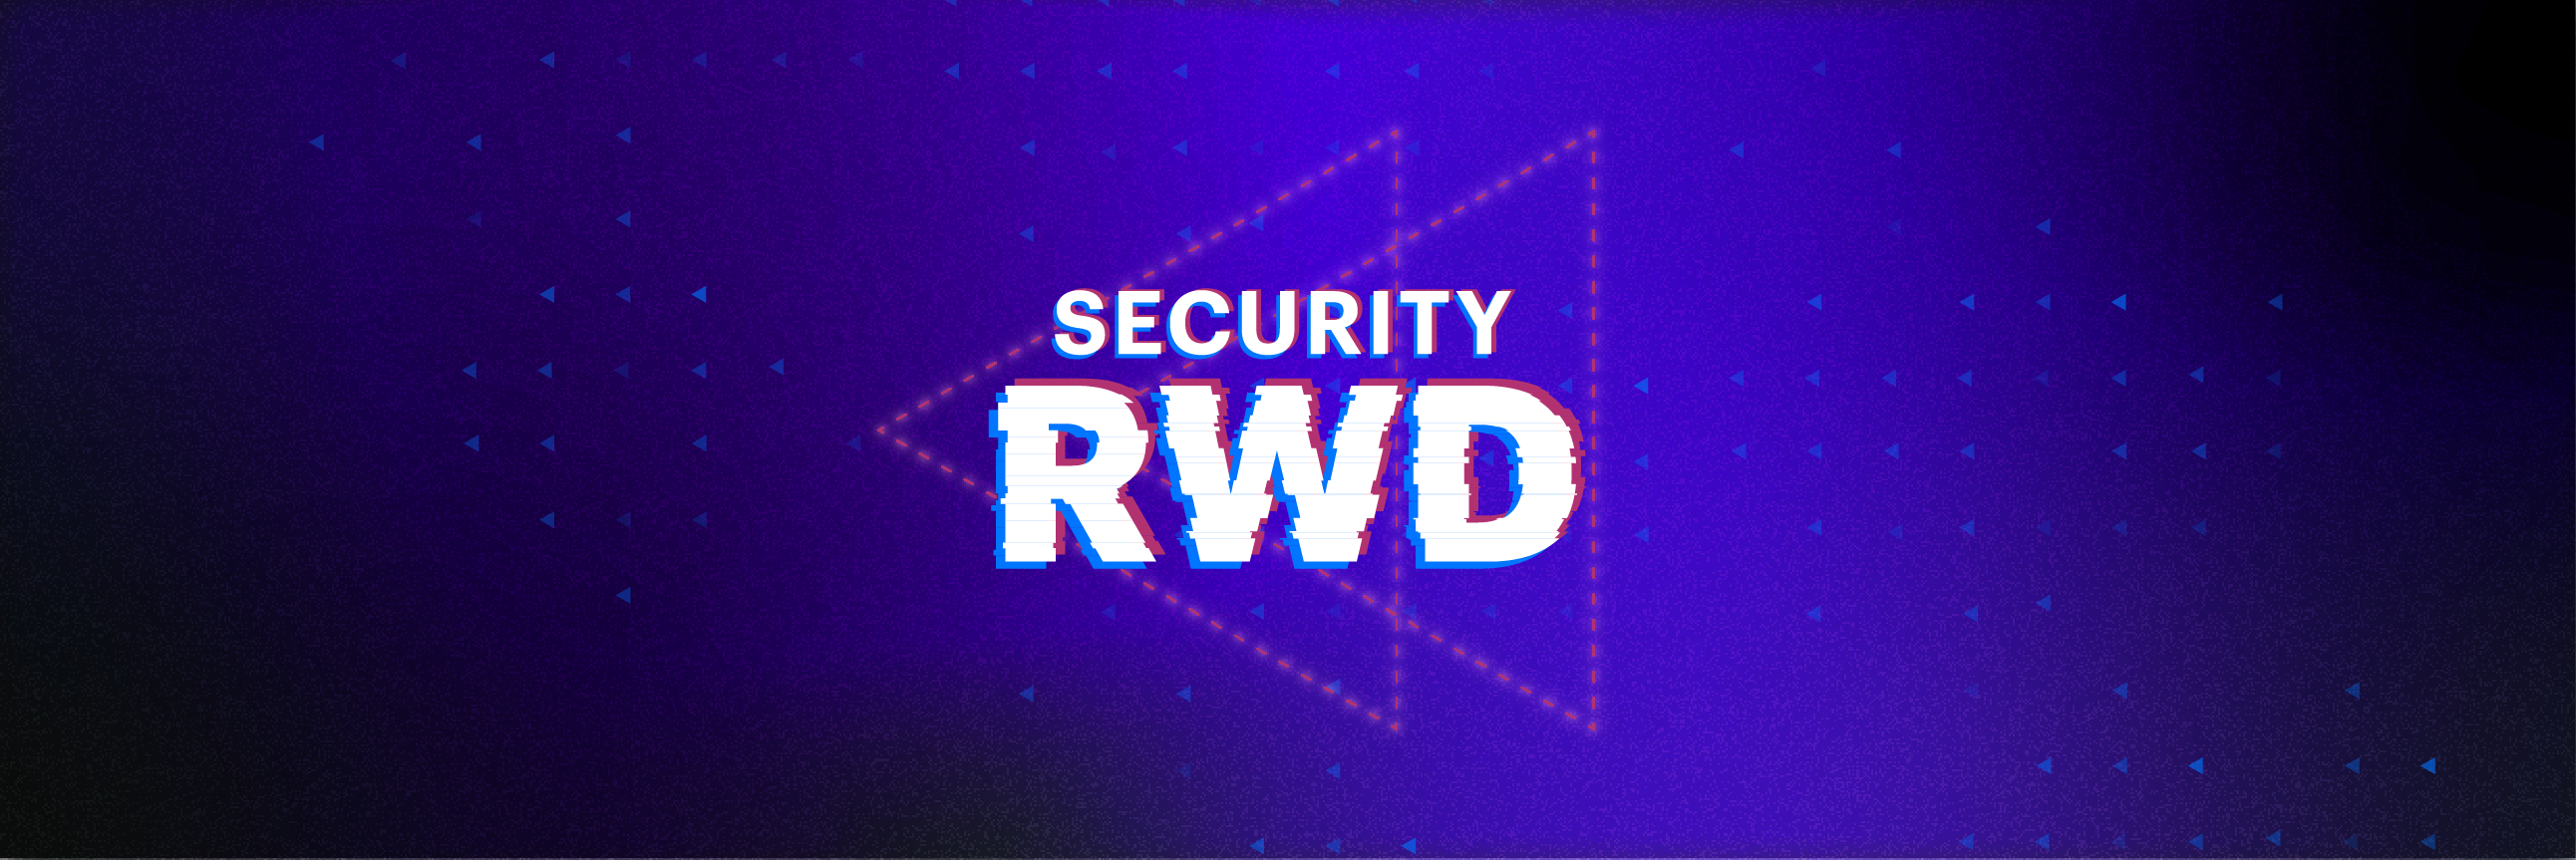 SecurityRWD - Introduction to AWS Elastic Compute Cloud (EC2)